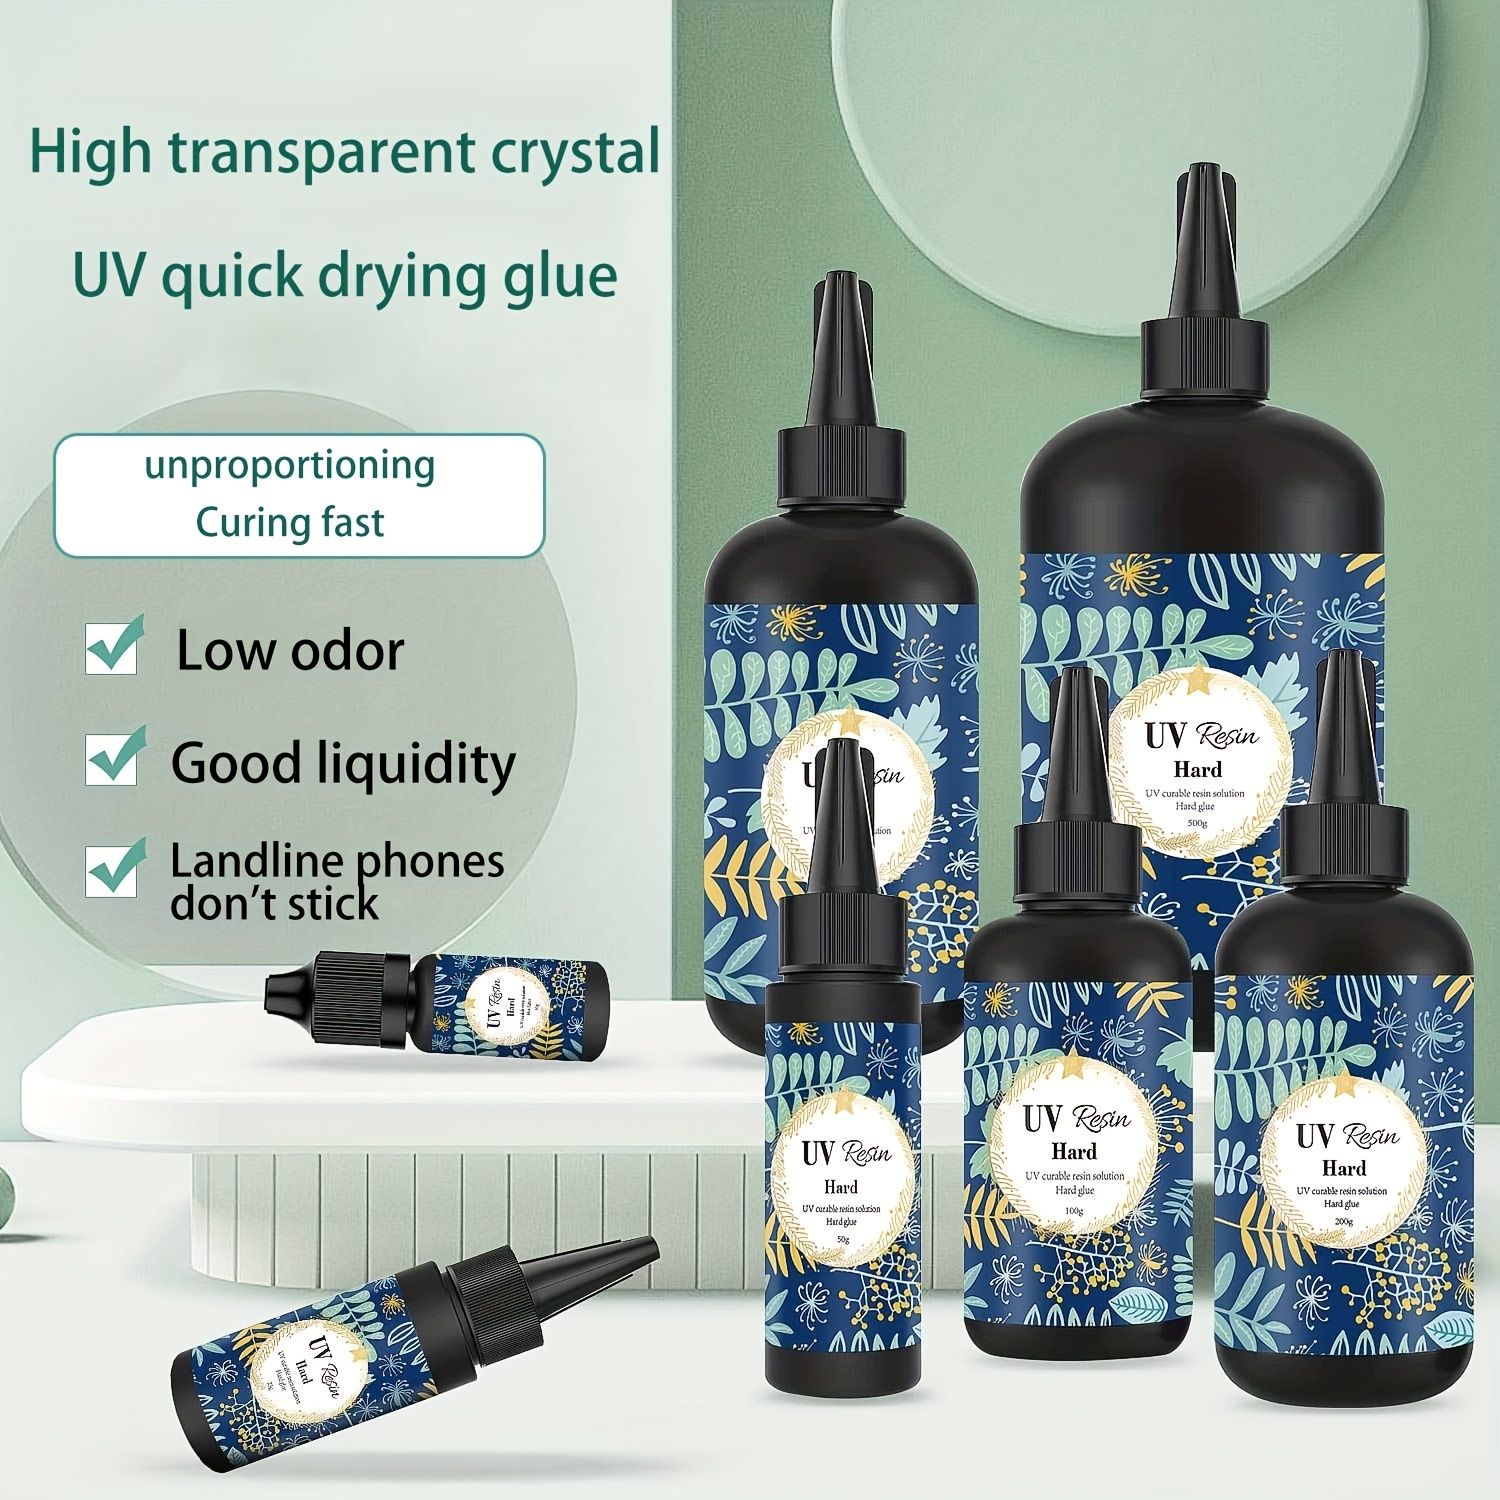 100g Uv Resin Adhesive Upgraded Version Uv Epoxy Resin Adhesive, Ultra Low  Odor, Transparent Resin Set, Hard Transparent Glue,sunlight Activated,  Ideal For Jewelry Making, Diy Decorative Crafts Accessories